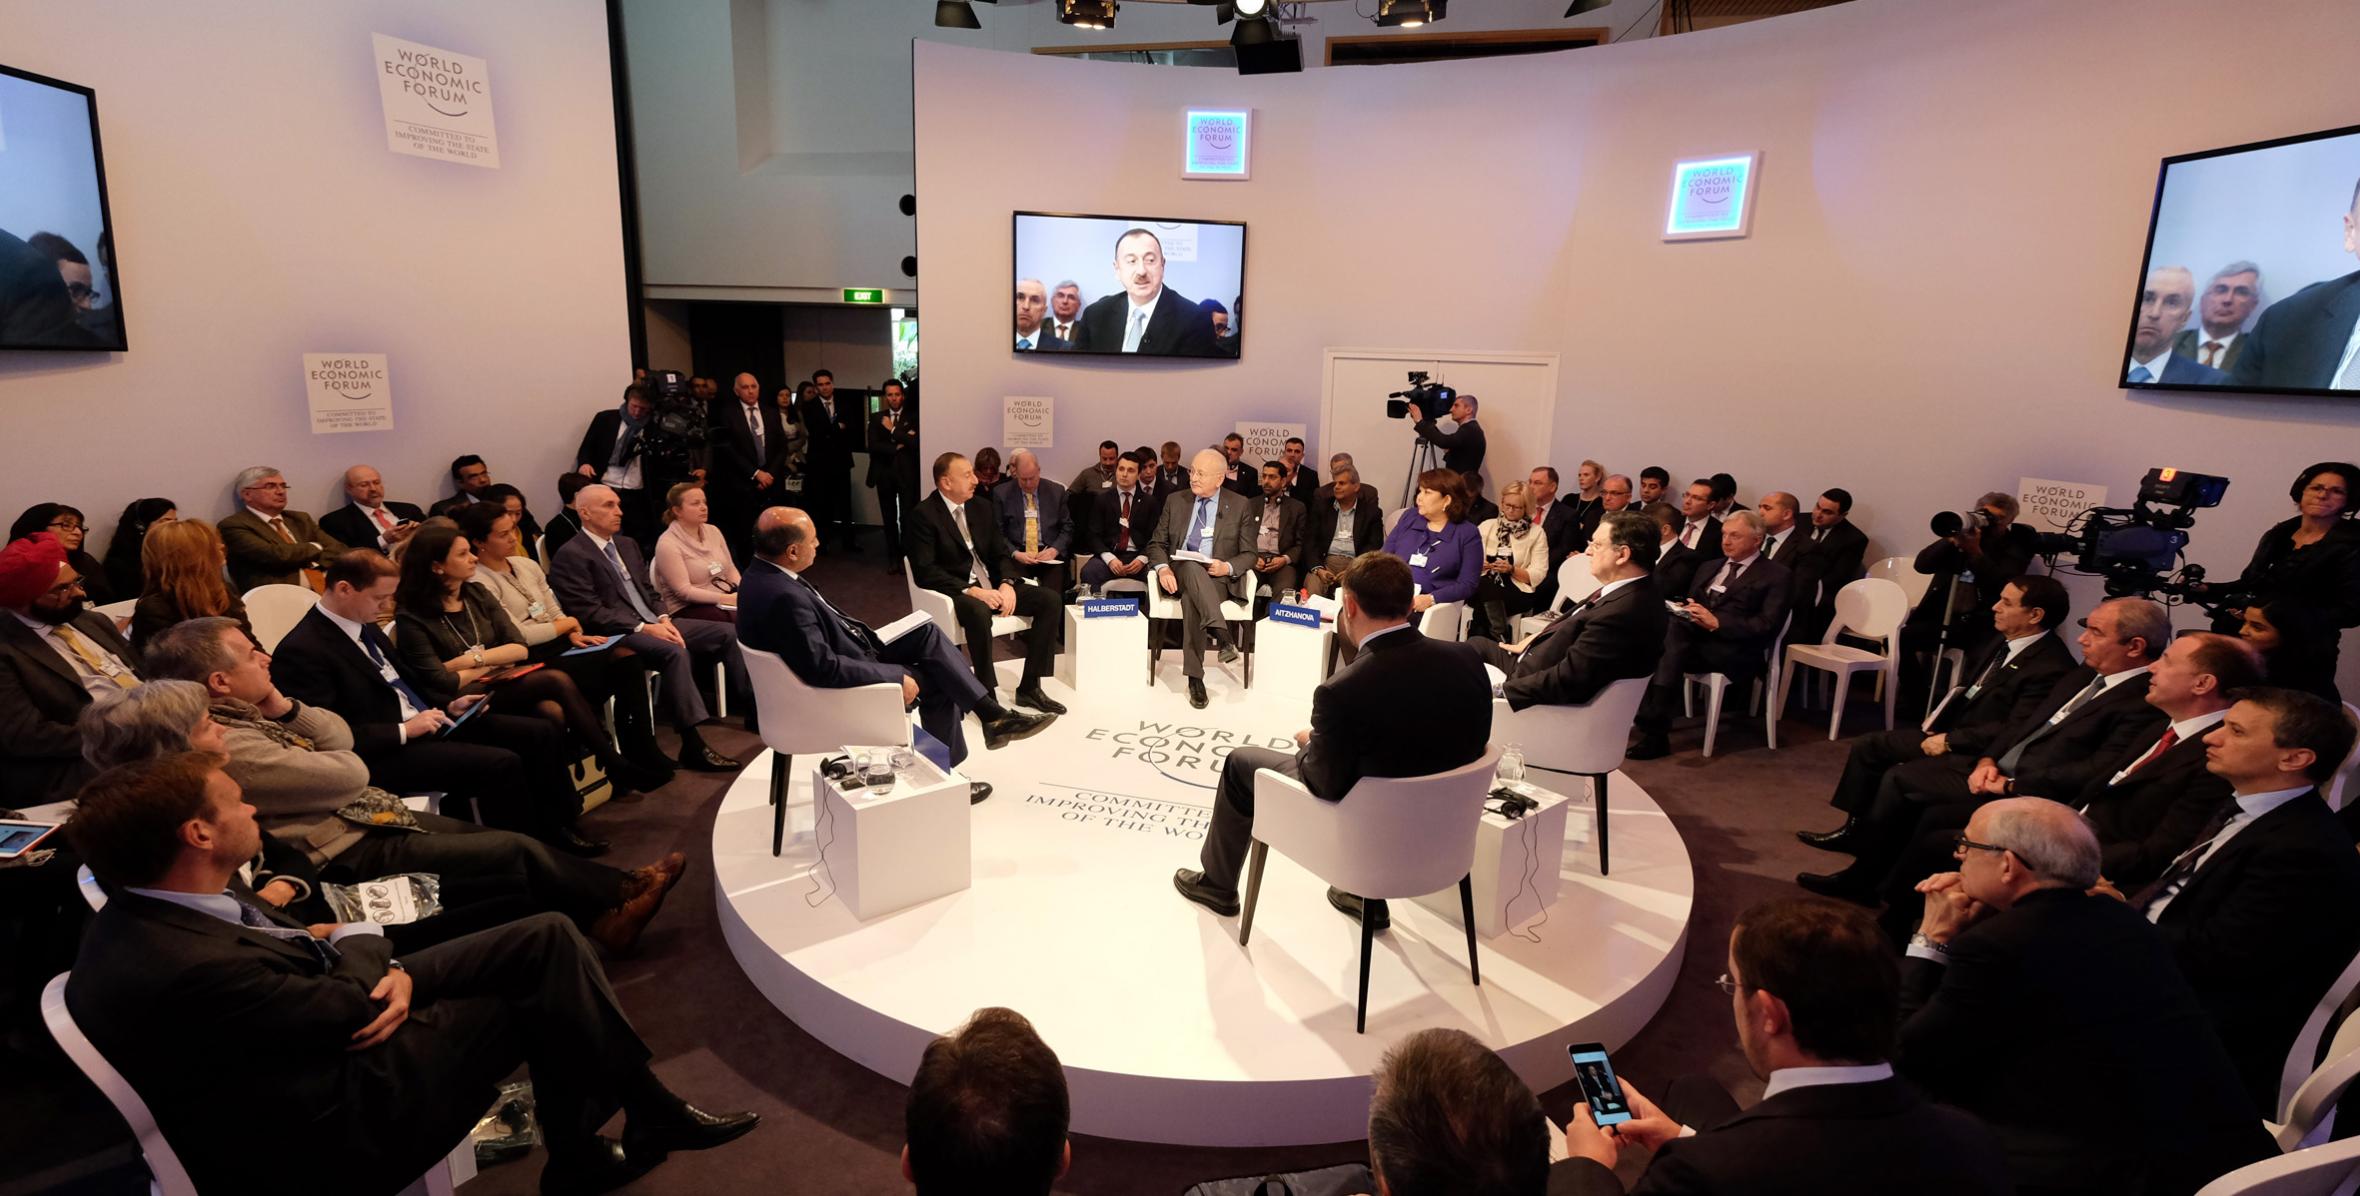 Ilham Aliyev attended “Regions in transformation: Eurasia” session of the World Economic Forum in Davos